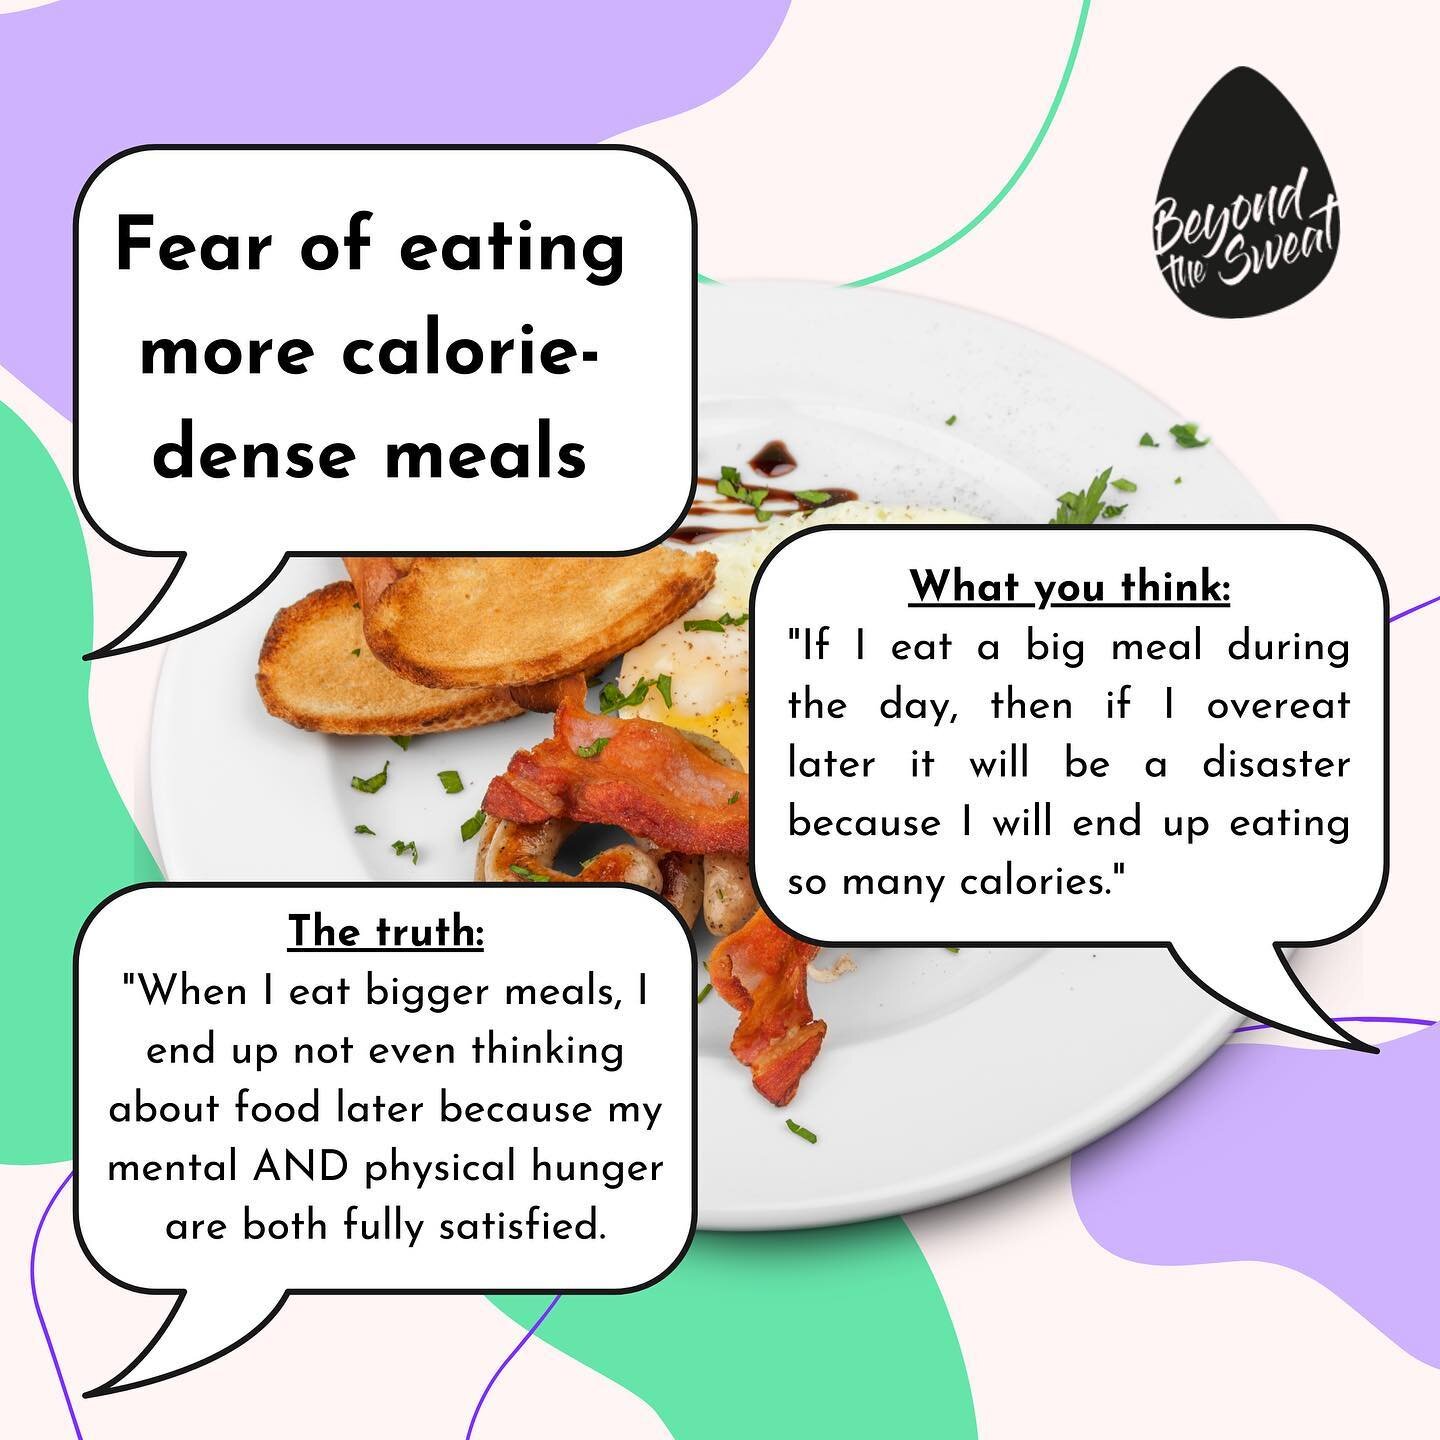 If I had a penny for every time I saw this one, I would have a whole lotta pennies!

The biggest problem with avoiding TRYING consistently eating more calorie-dense meals is that it becomes a self-fulfilling prophecy:

You under-eat at your meals ear